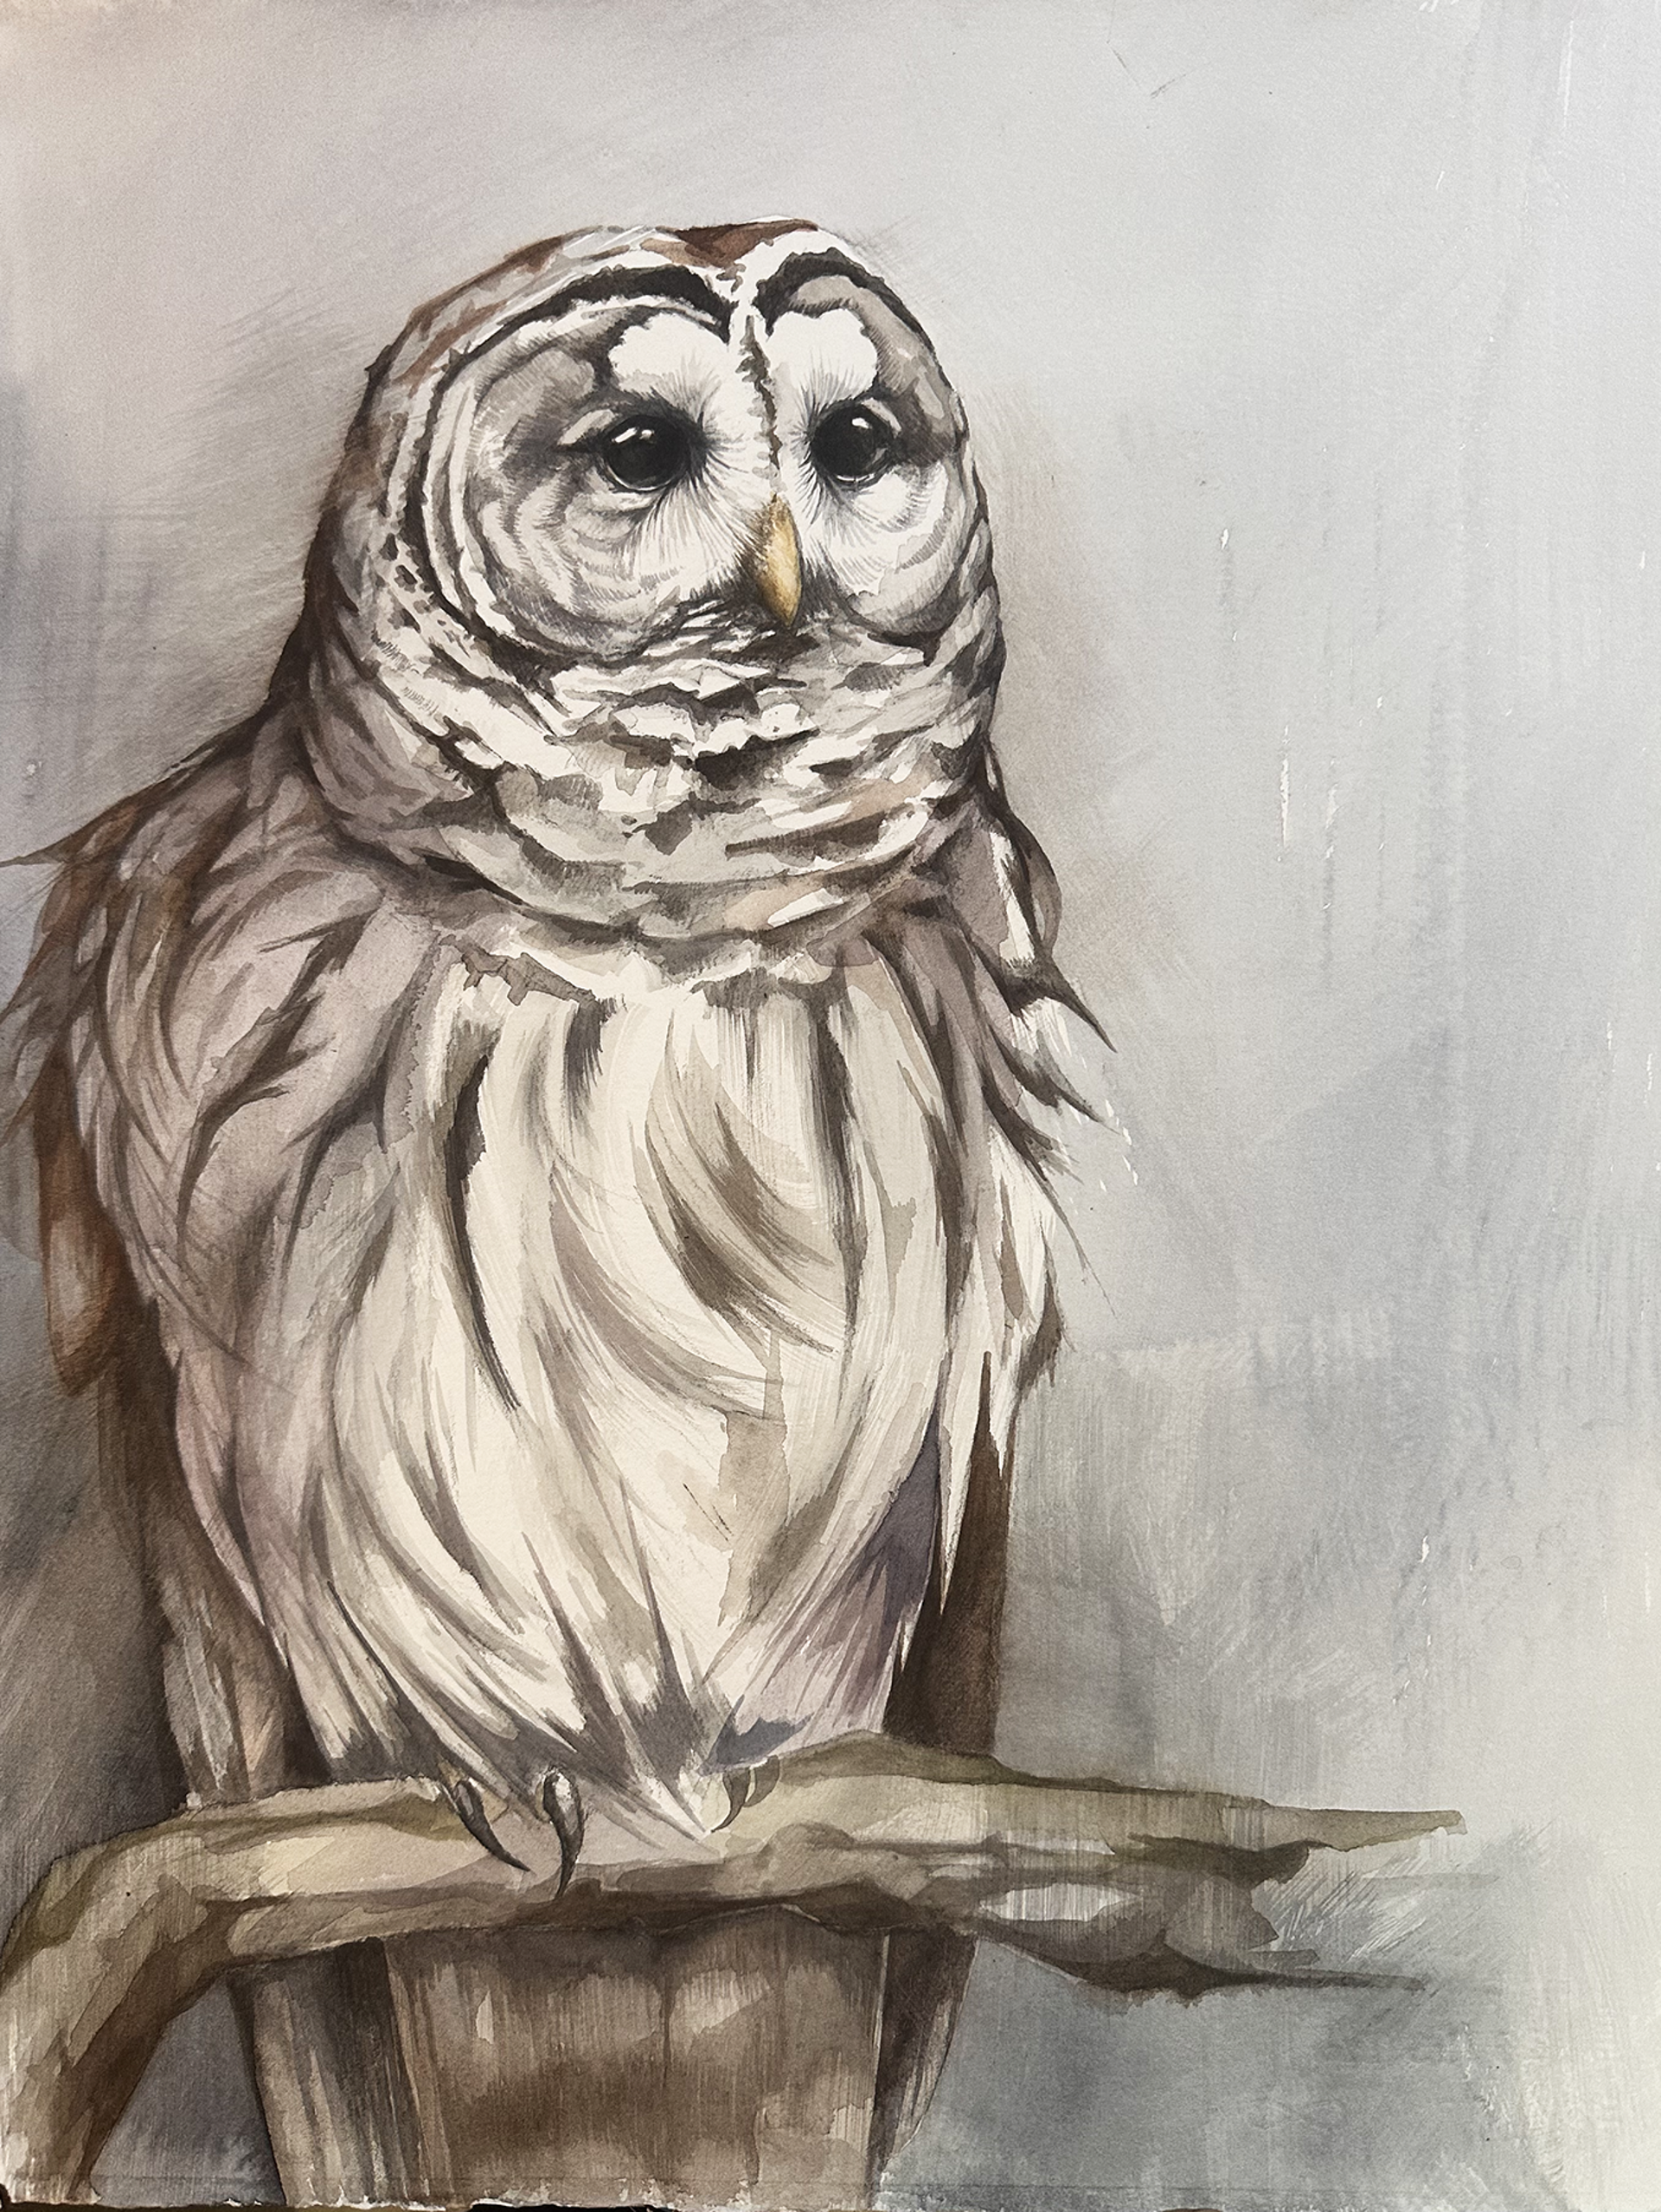 She Spoke With Her Eyes (Barred Owl) by Jennifer Anderson